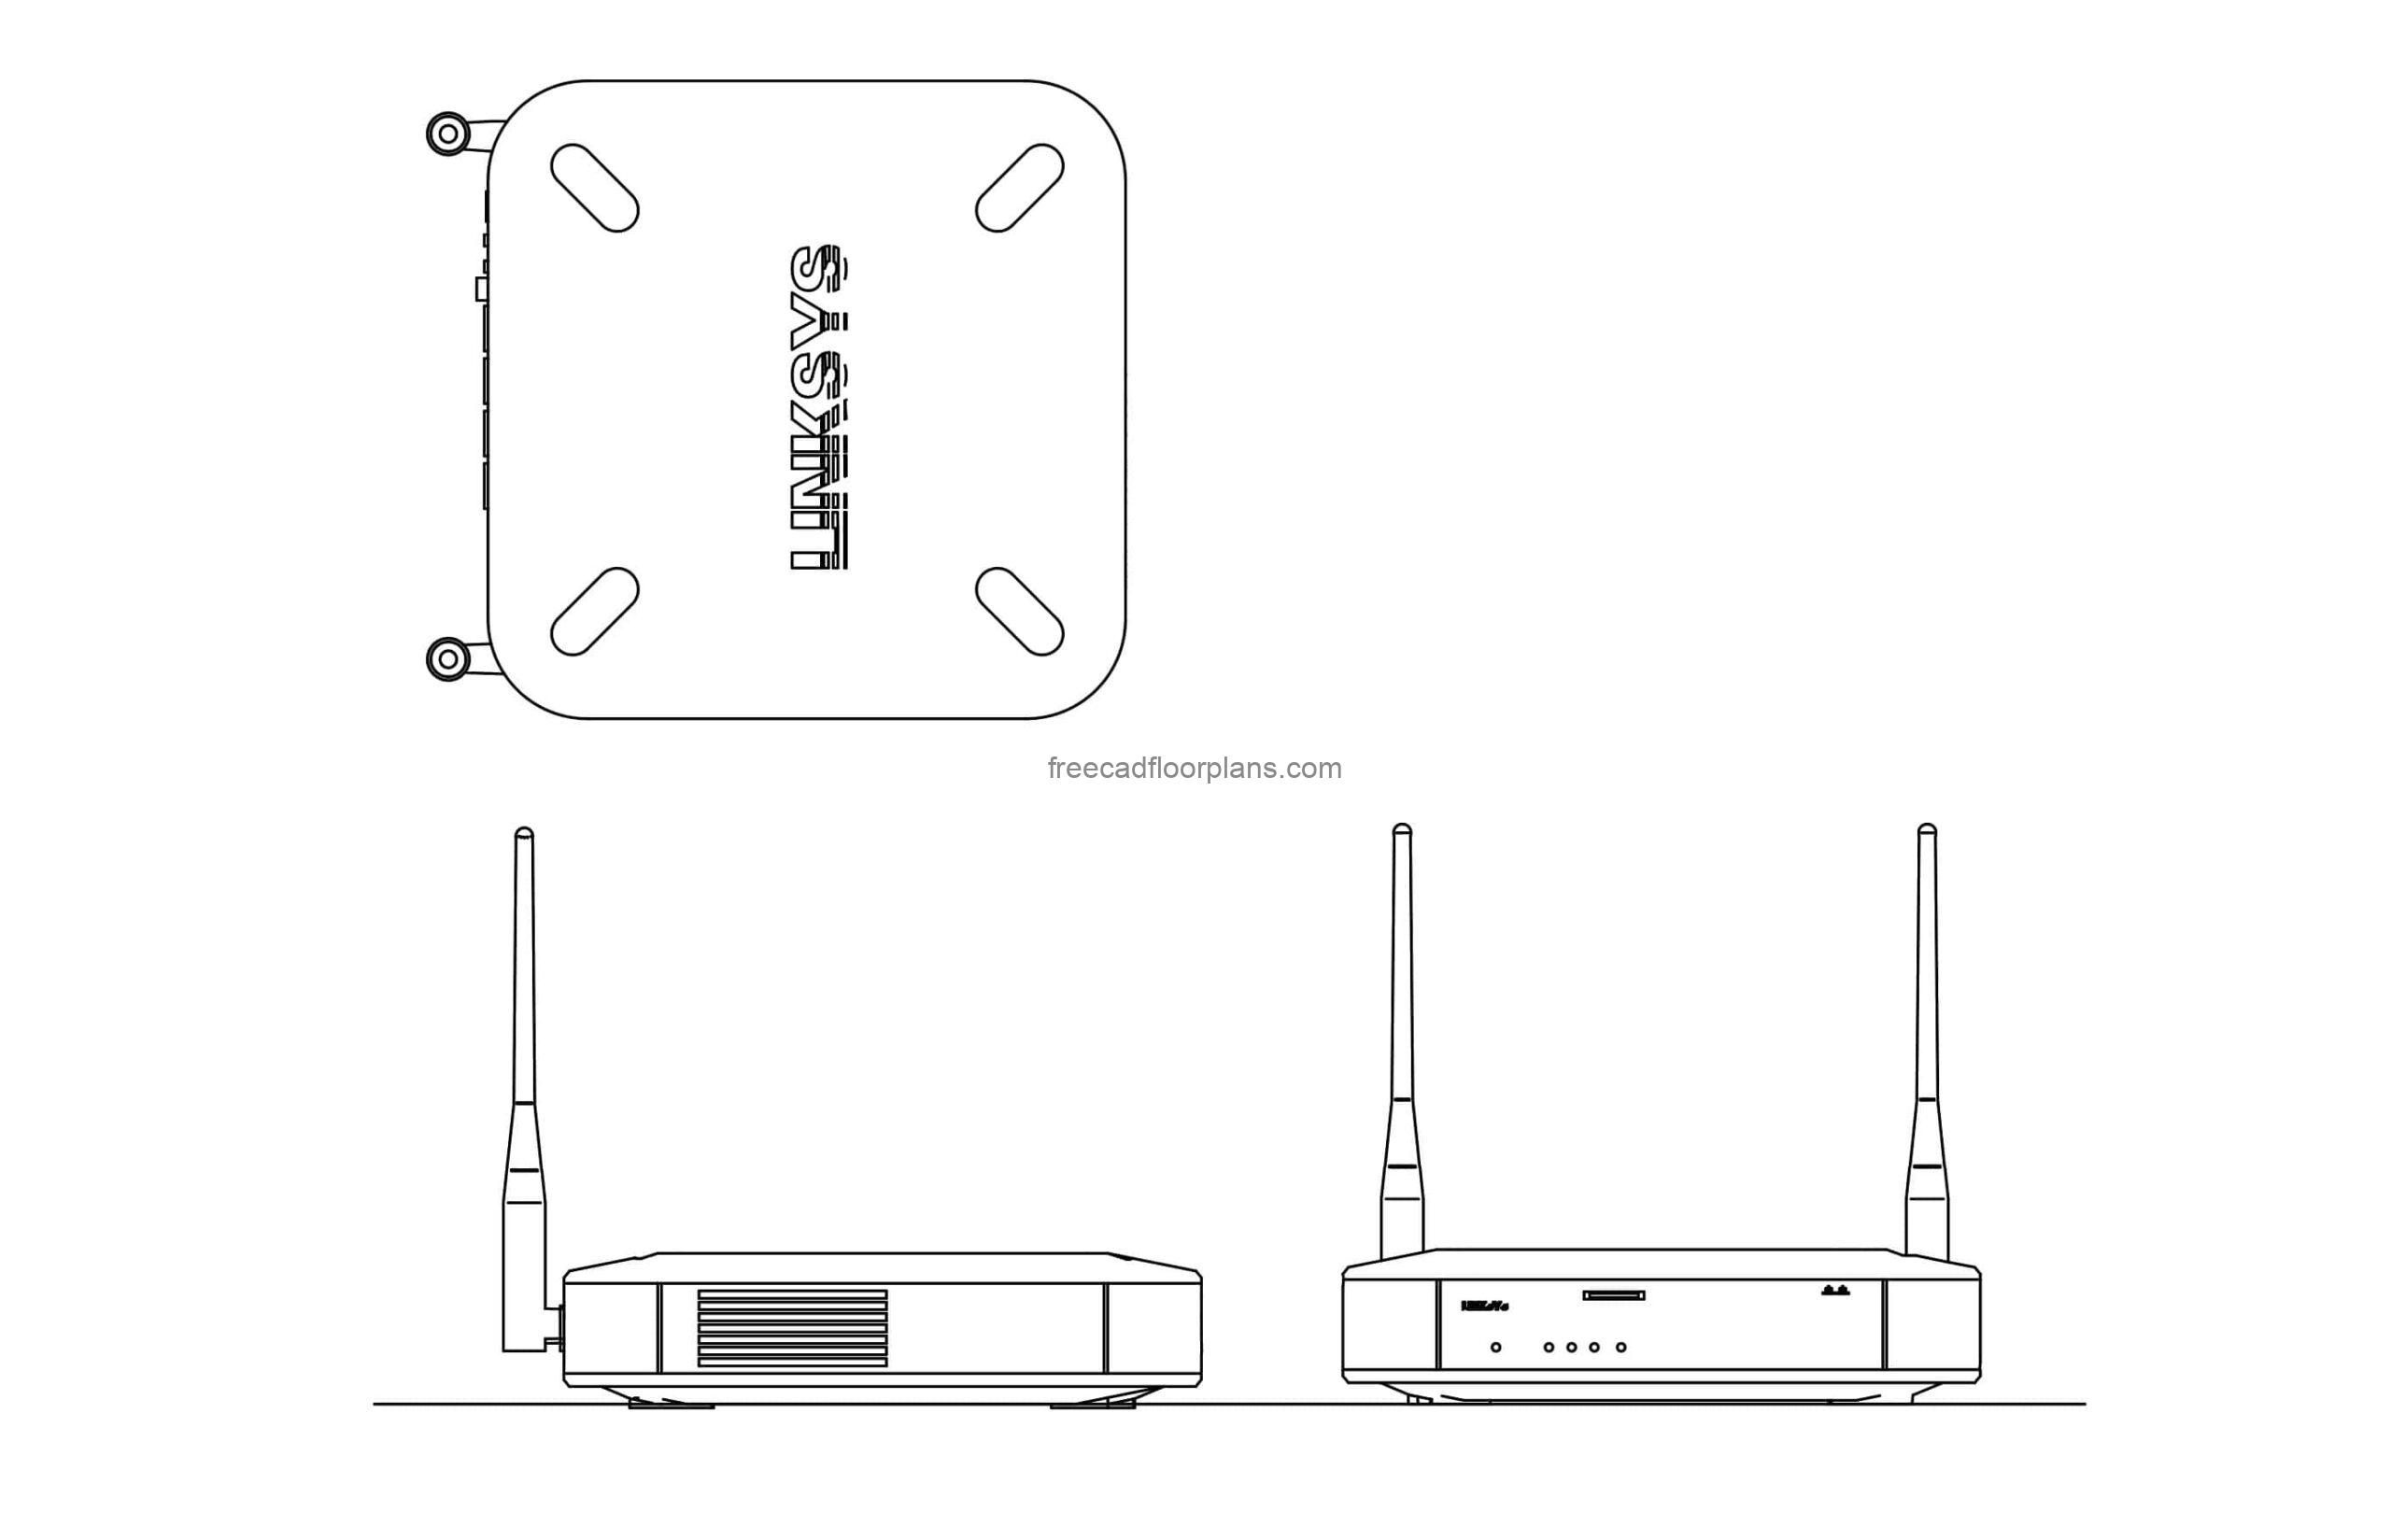 wifi router autocad drawing plan and elevations 2d views free dwg file for download